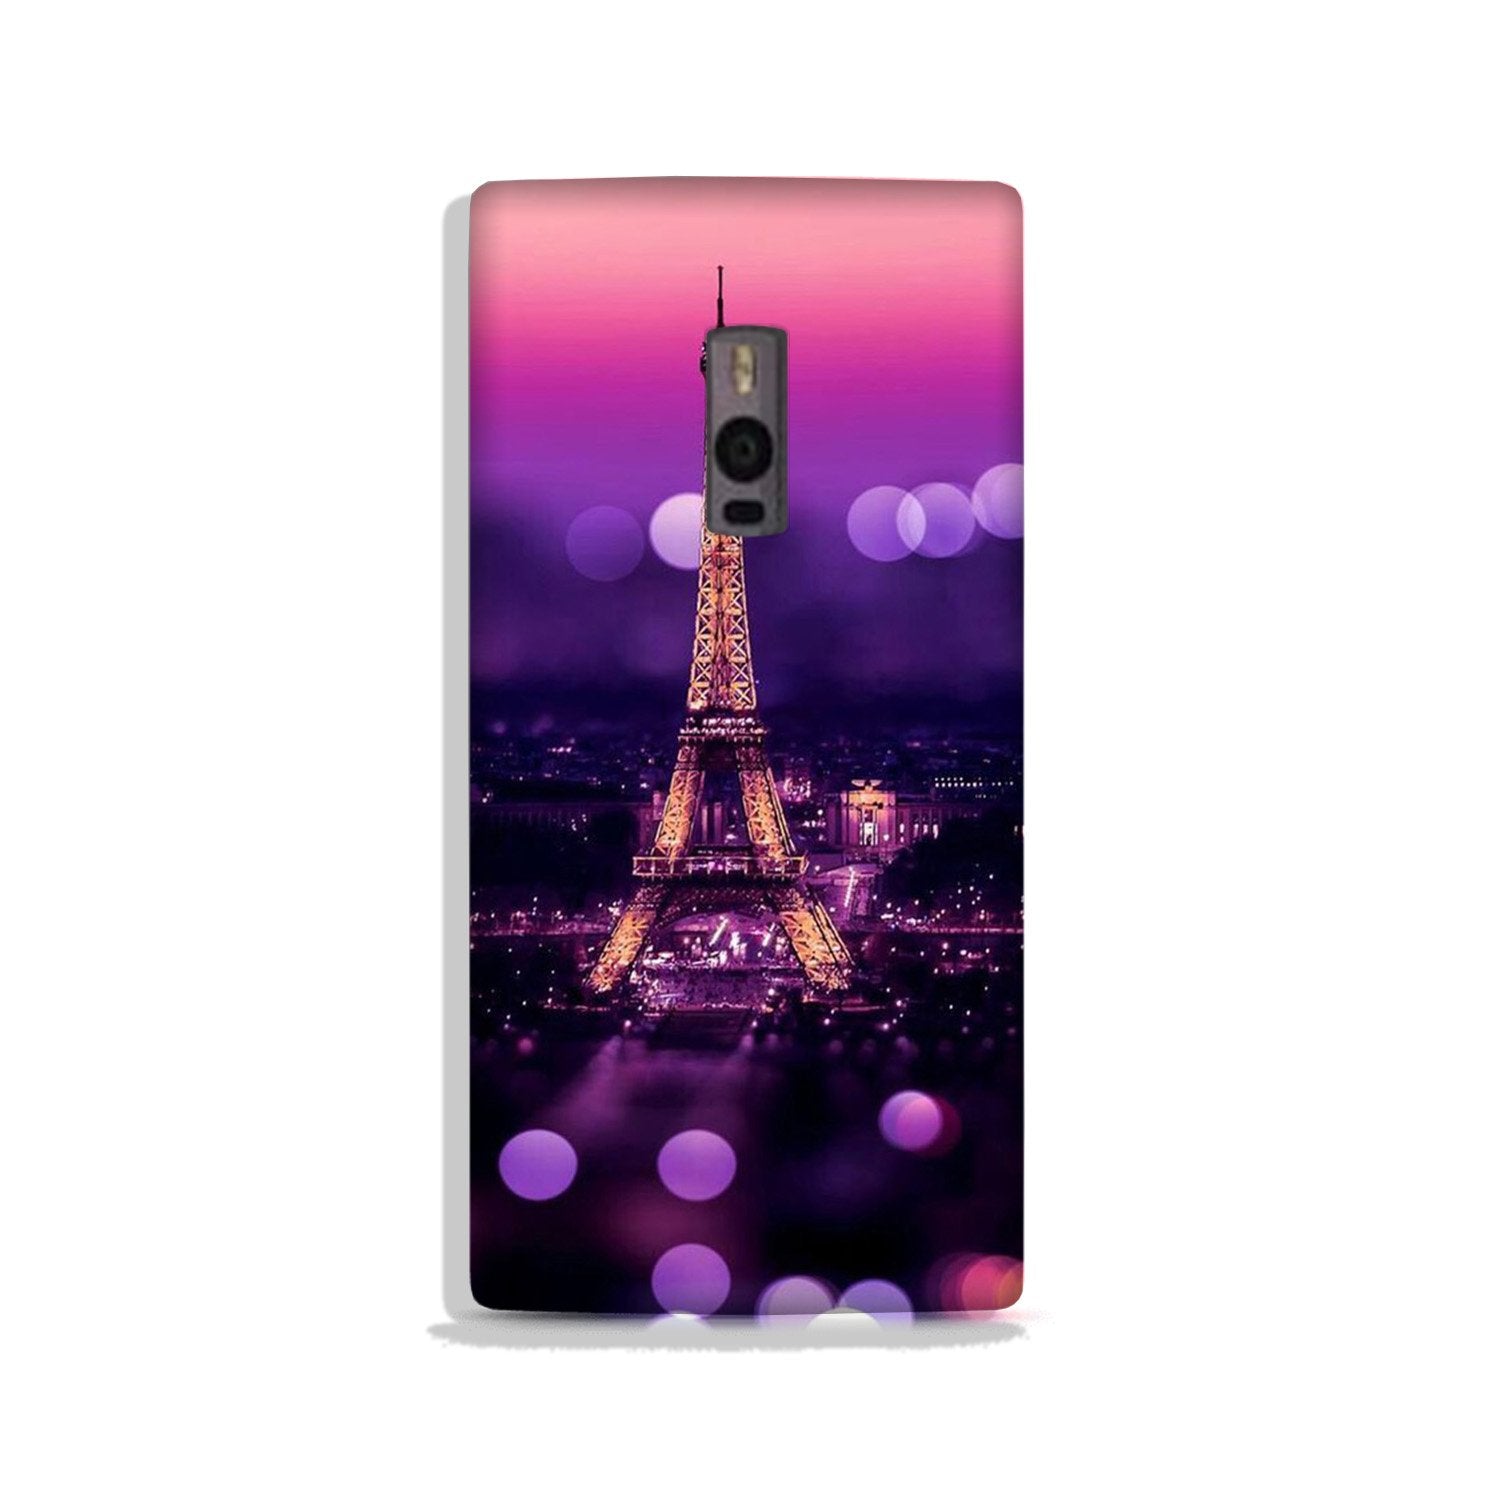 Eiffel Tower Case for OnePlus 2